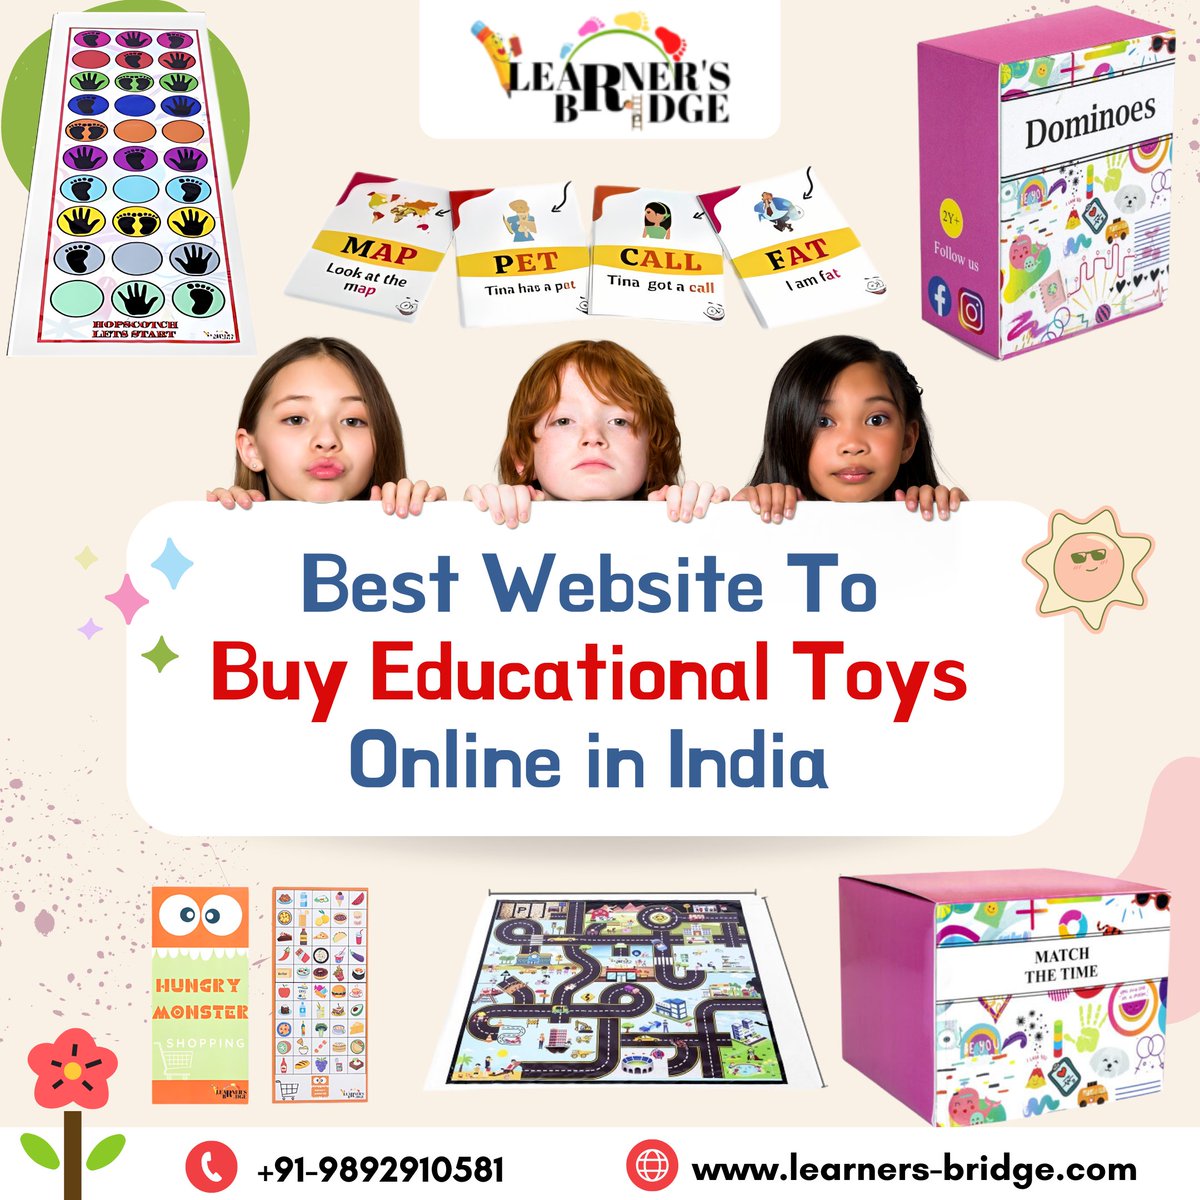 🎉 Dive into the world of learning and laughter with Learners Bridge! 

For more information read our blog - learners-bridge.com/best-website-t…

✨ #EducationalToys #playandlearn #happykids #shopnowonline 🛒🎁